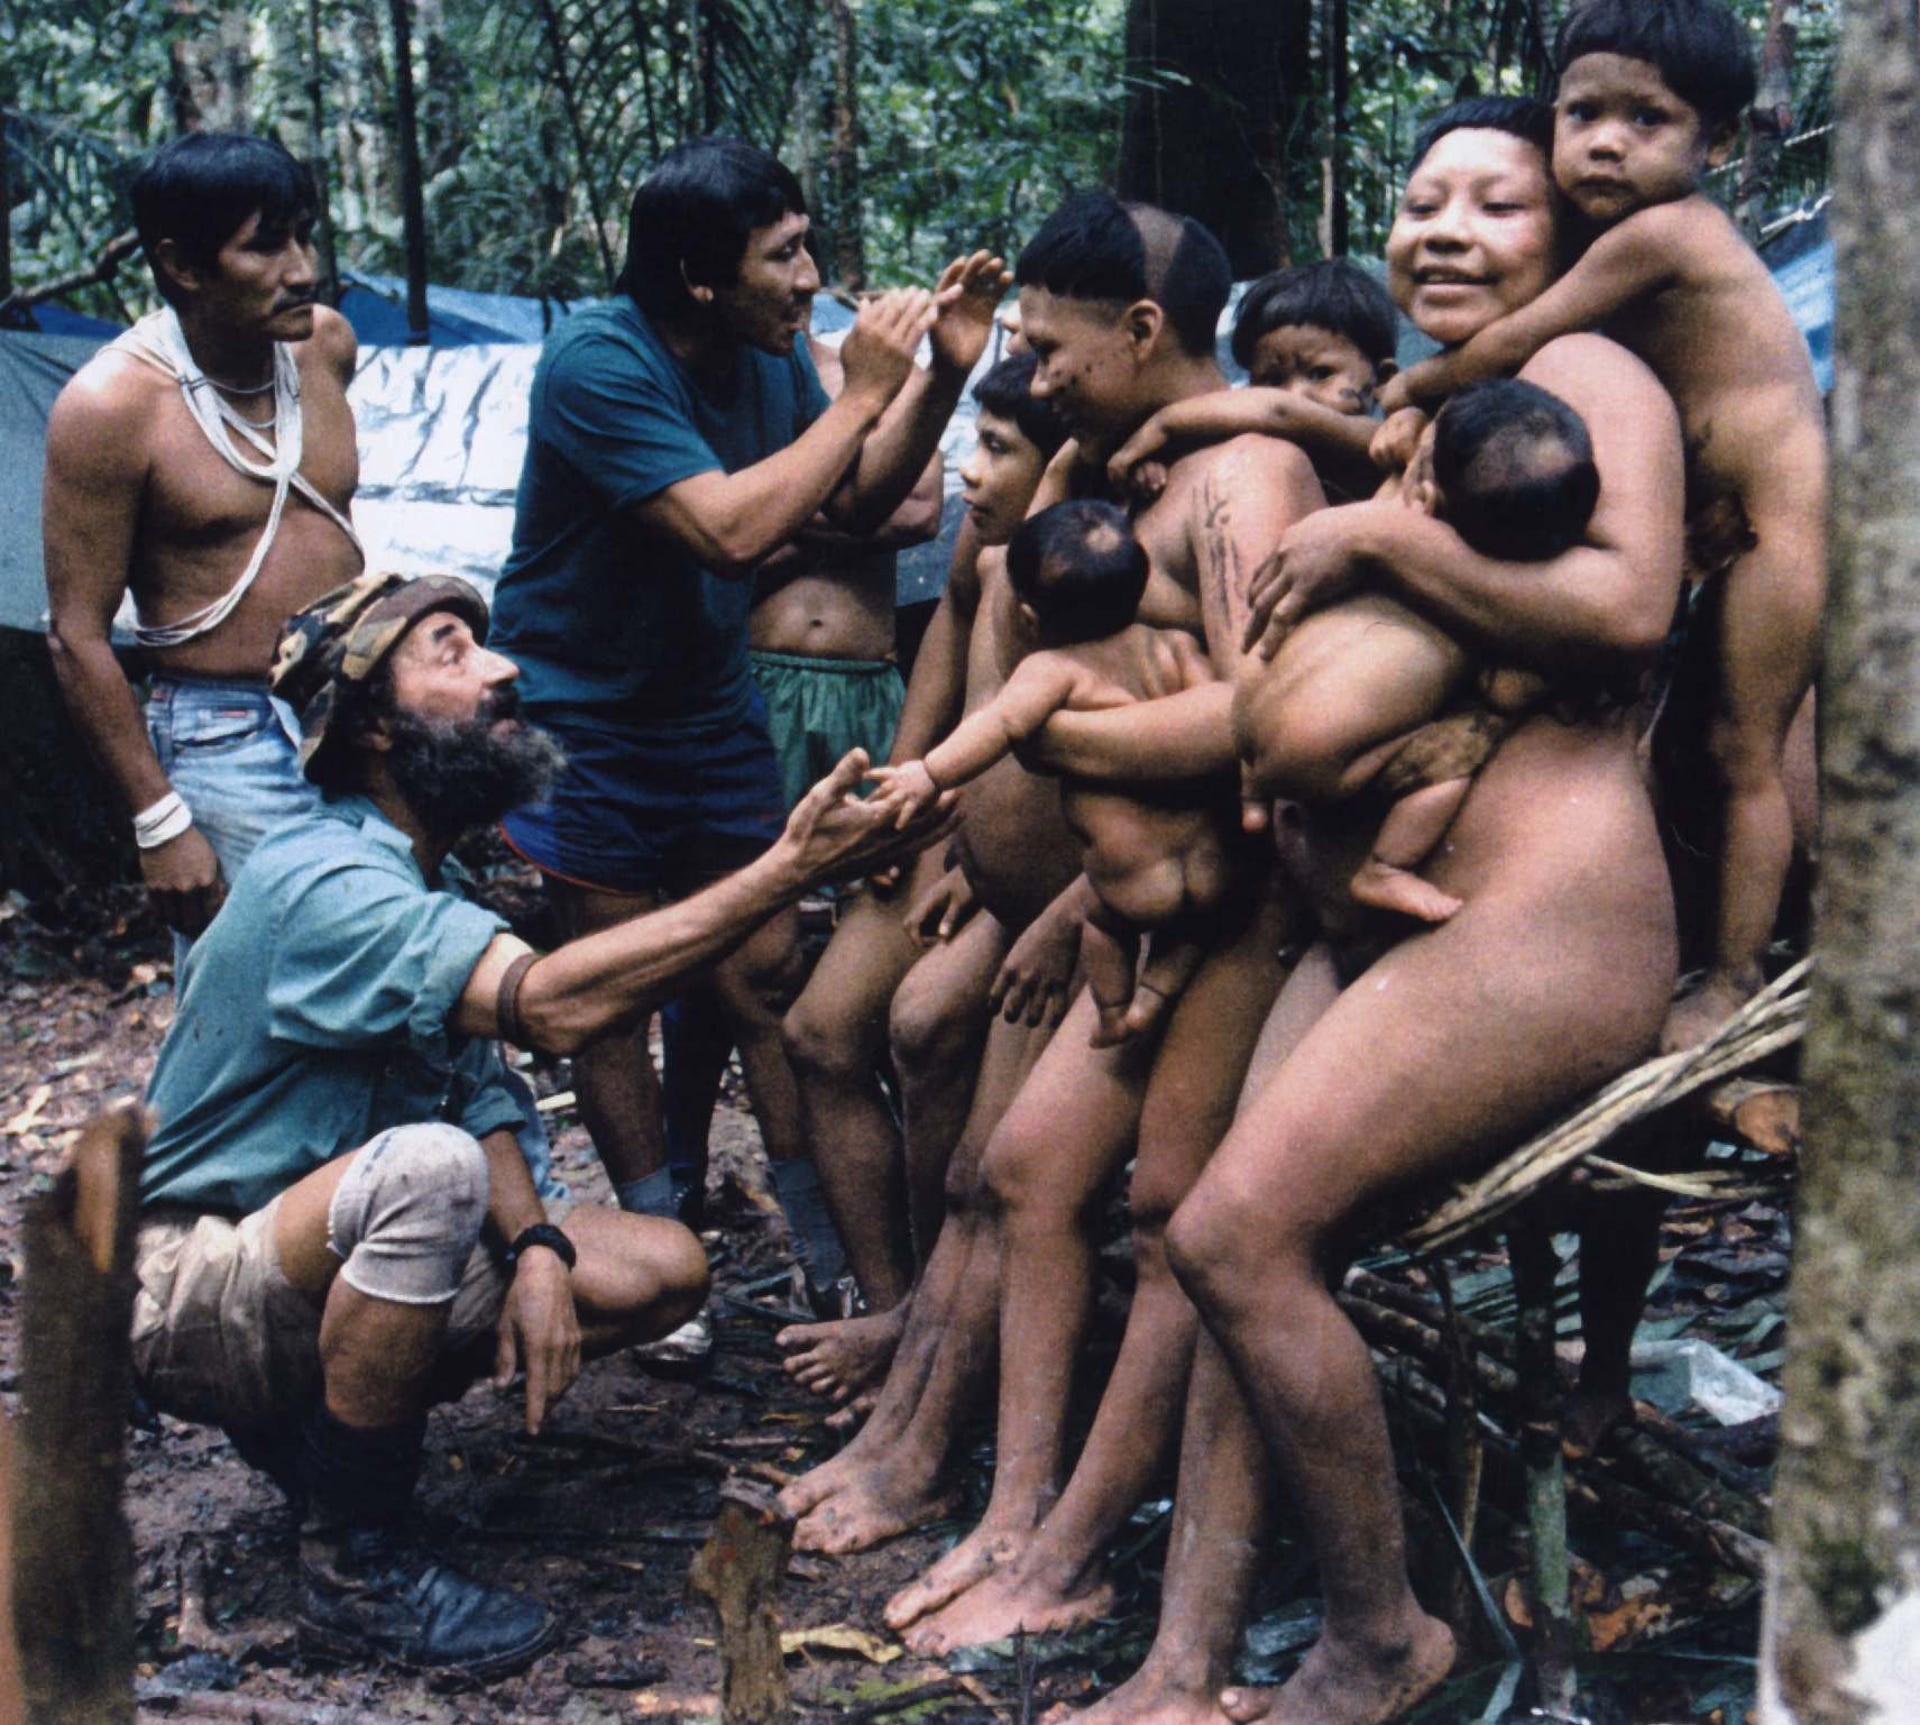 Wild Tribes Porn from the Amazon Private (78 photos) - sex eporner pics